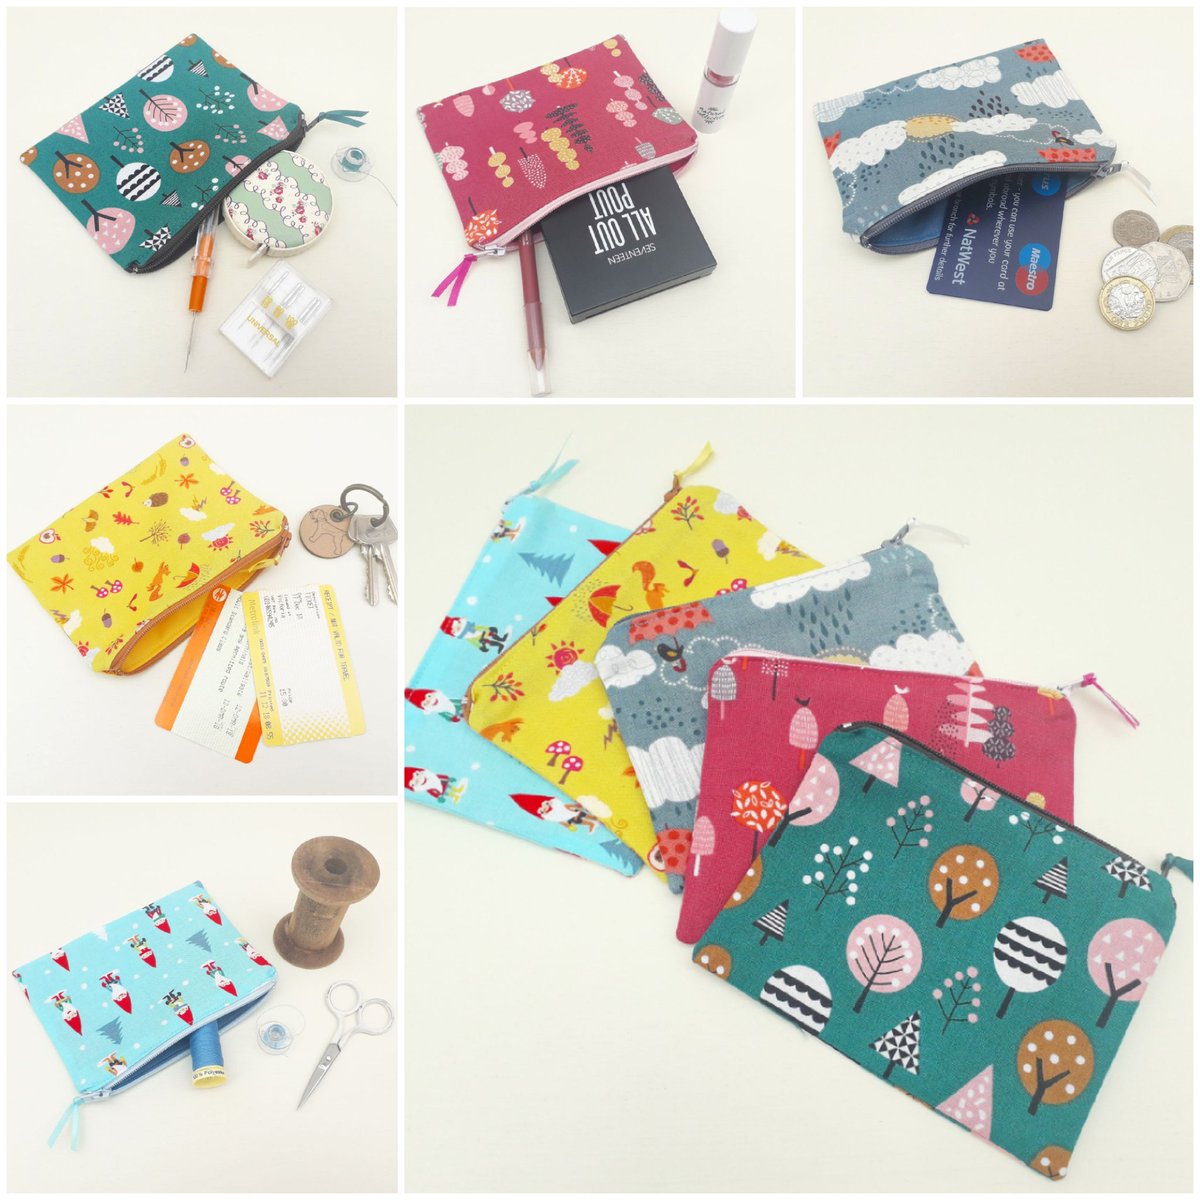 @MHHSBD I'm Helen and along with Heidi i'd like to show you our NEW Limited Edition, Autumn & Winter collection of matching Dog Bandanas & Purses. Choose from 5 designs & colours all with a woodland or weather theme. Available now!🌲🍁🌧🍂☔🐿 #MHHSBD #EarlyBiz #etsy